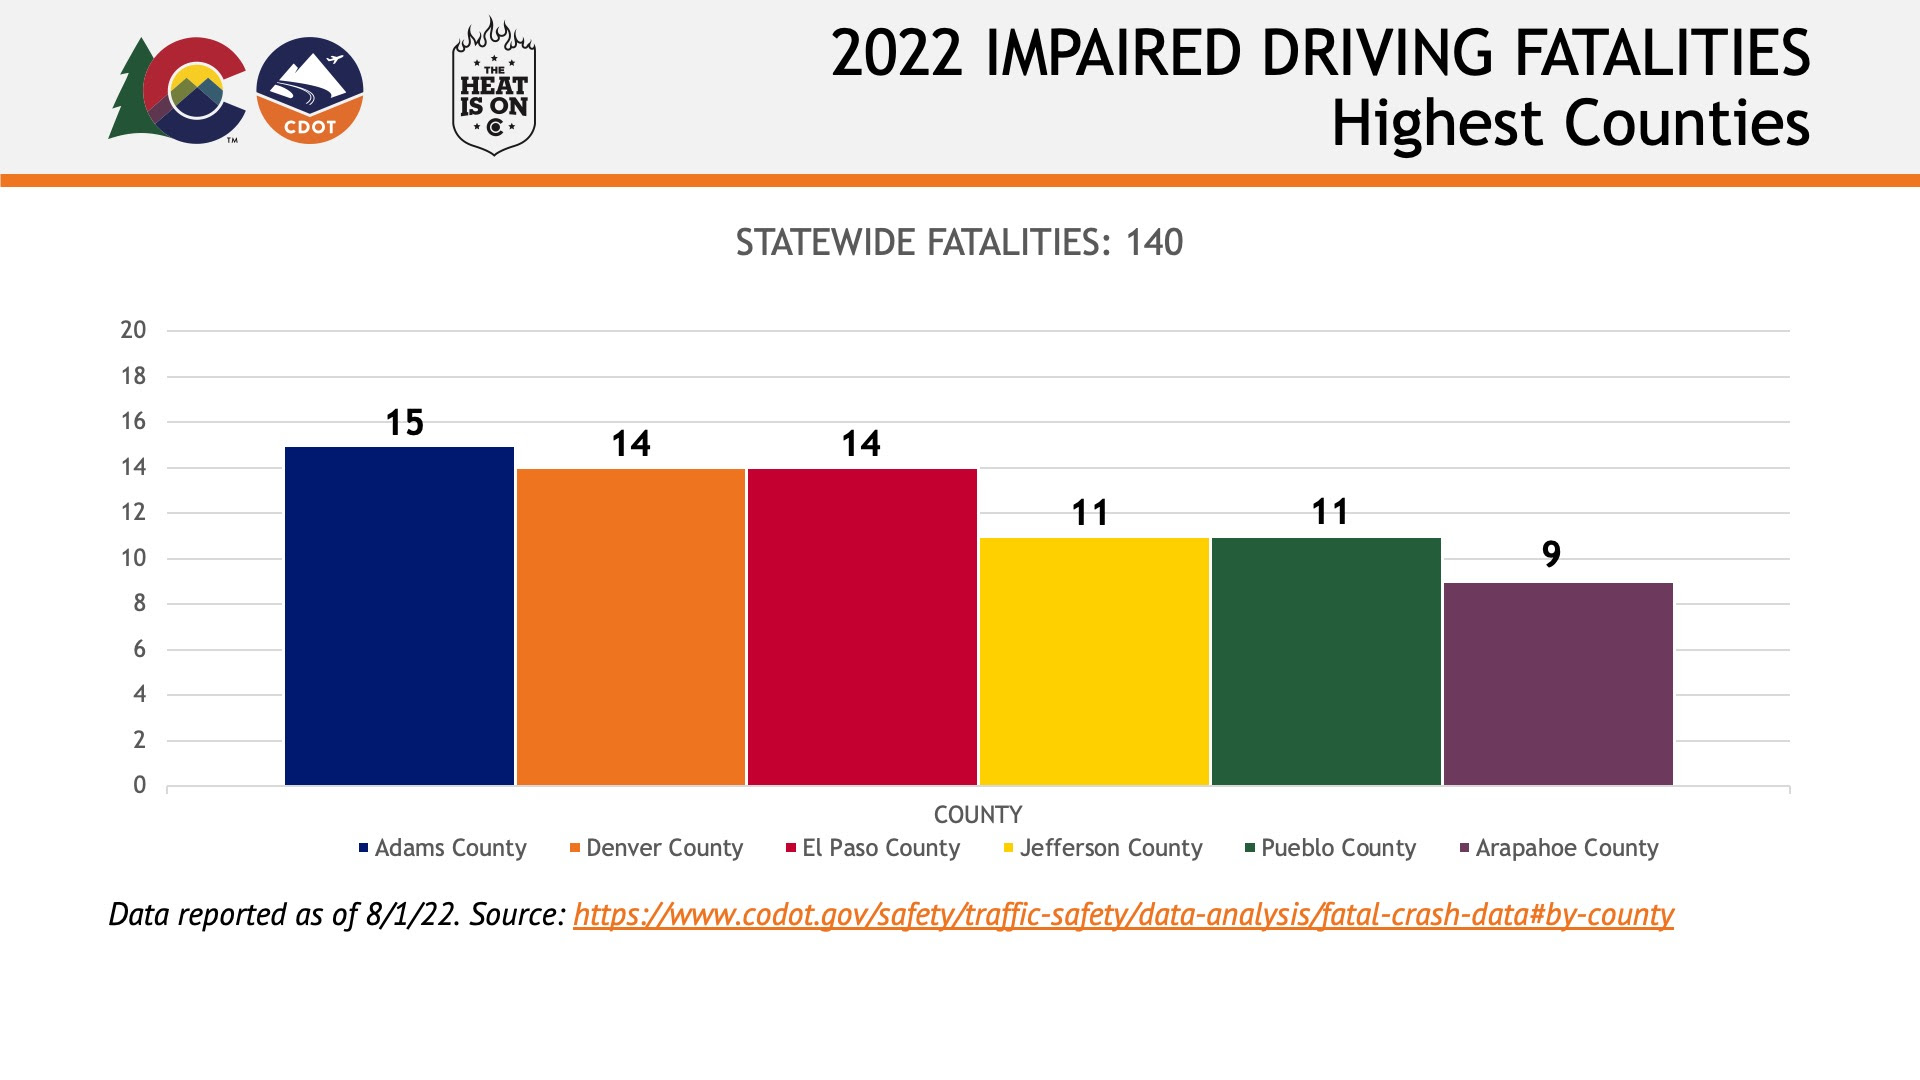 2022 Impaired Driving Fatalities Highest Counties chart detail image